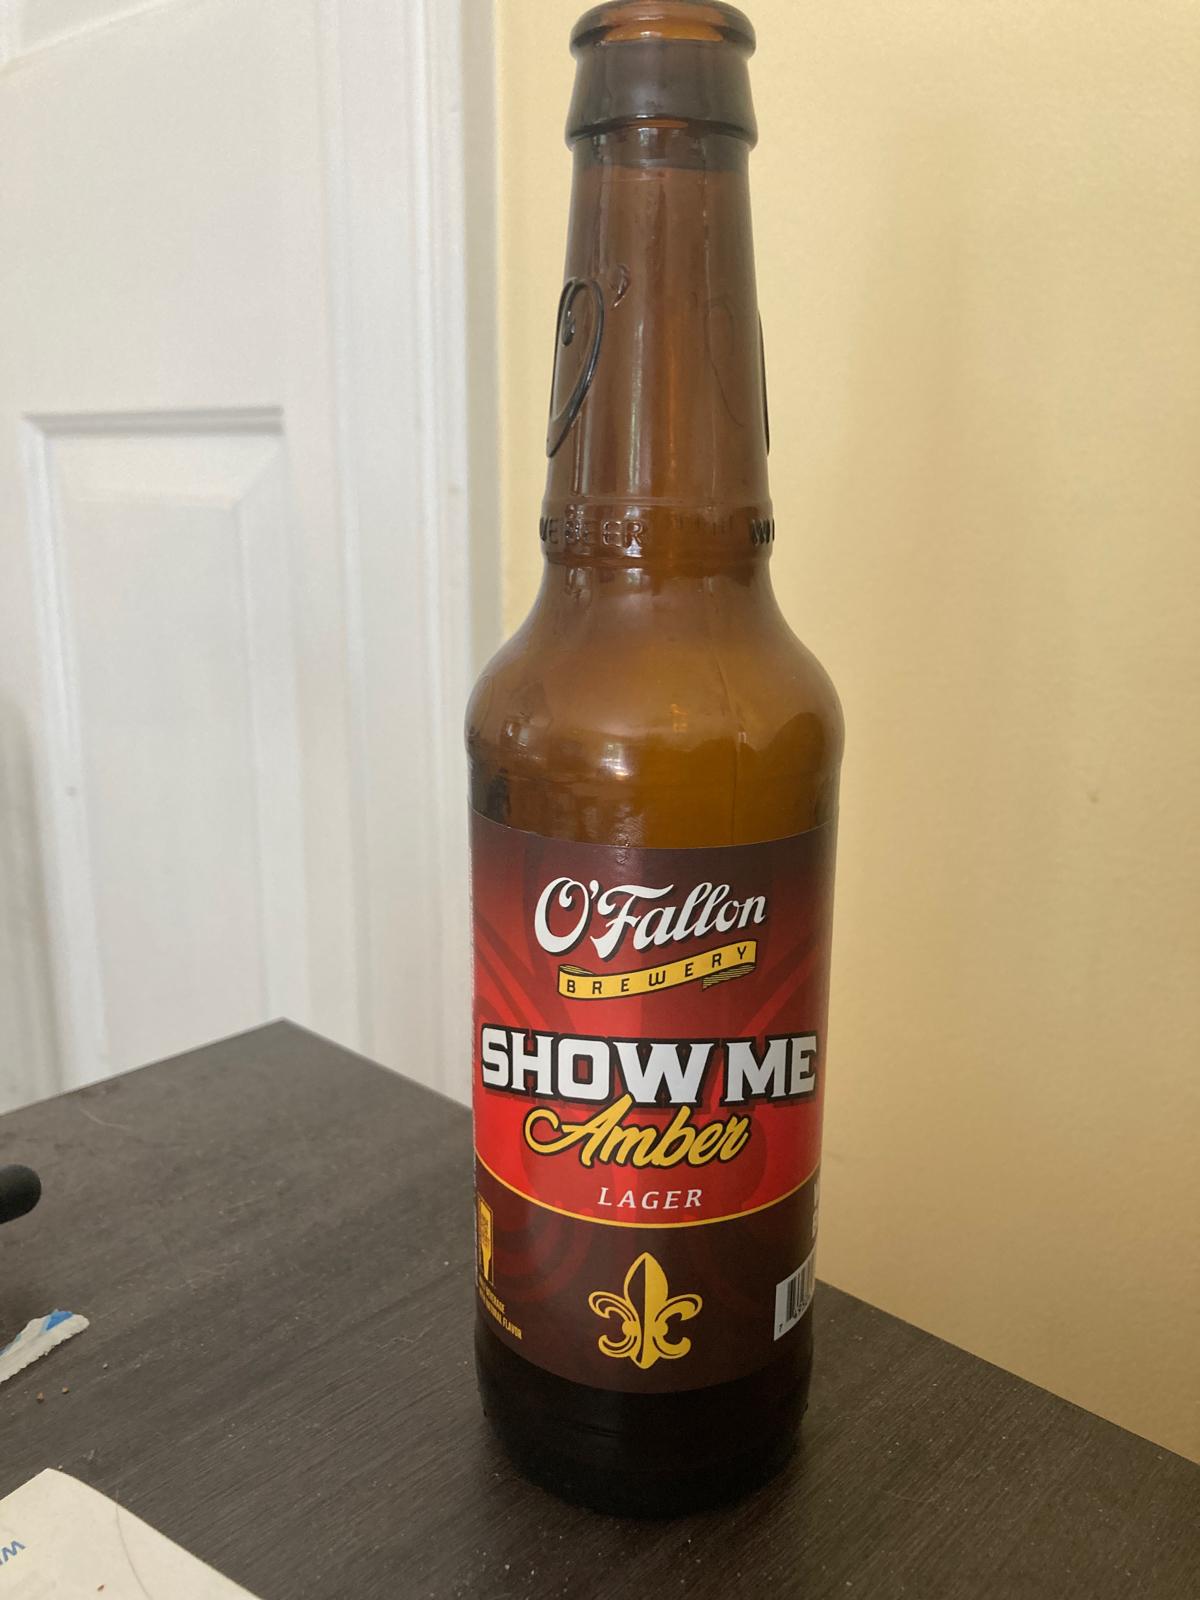 Show ME Amber Lager